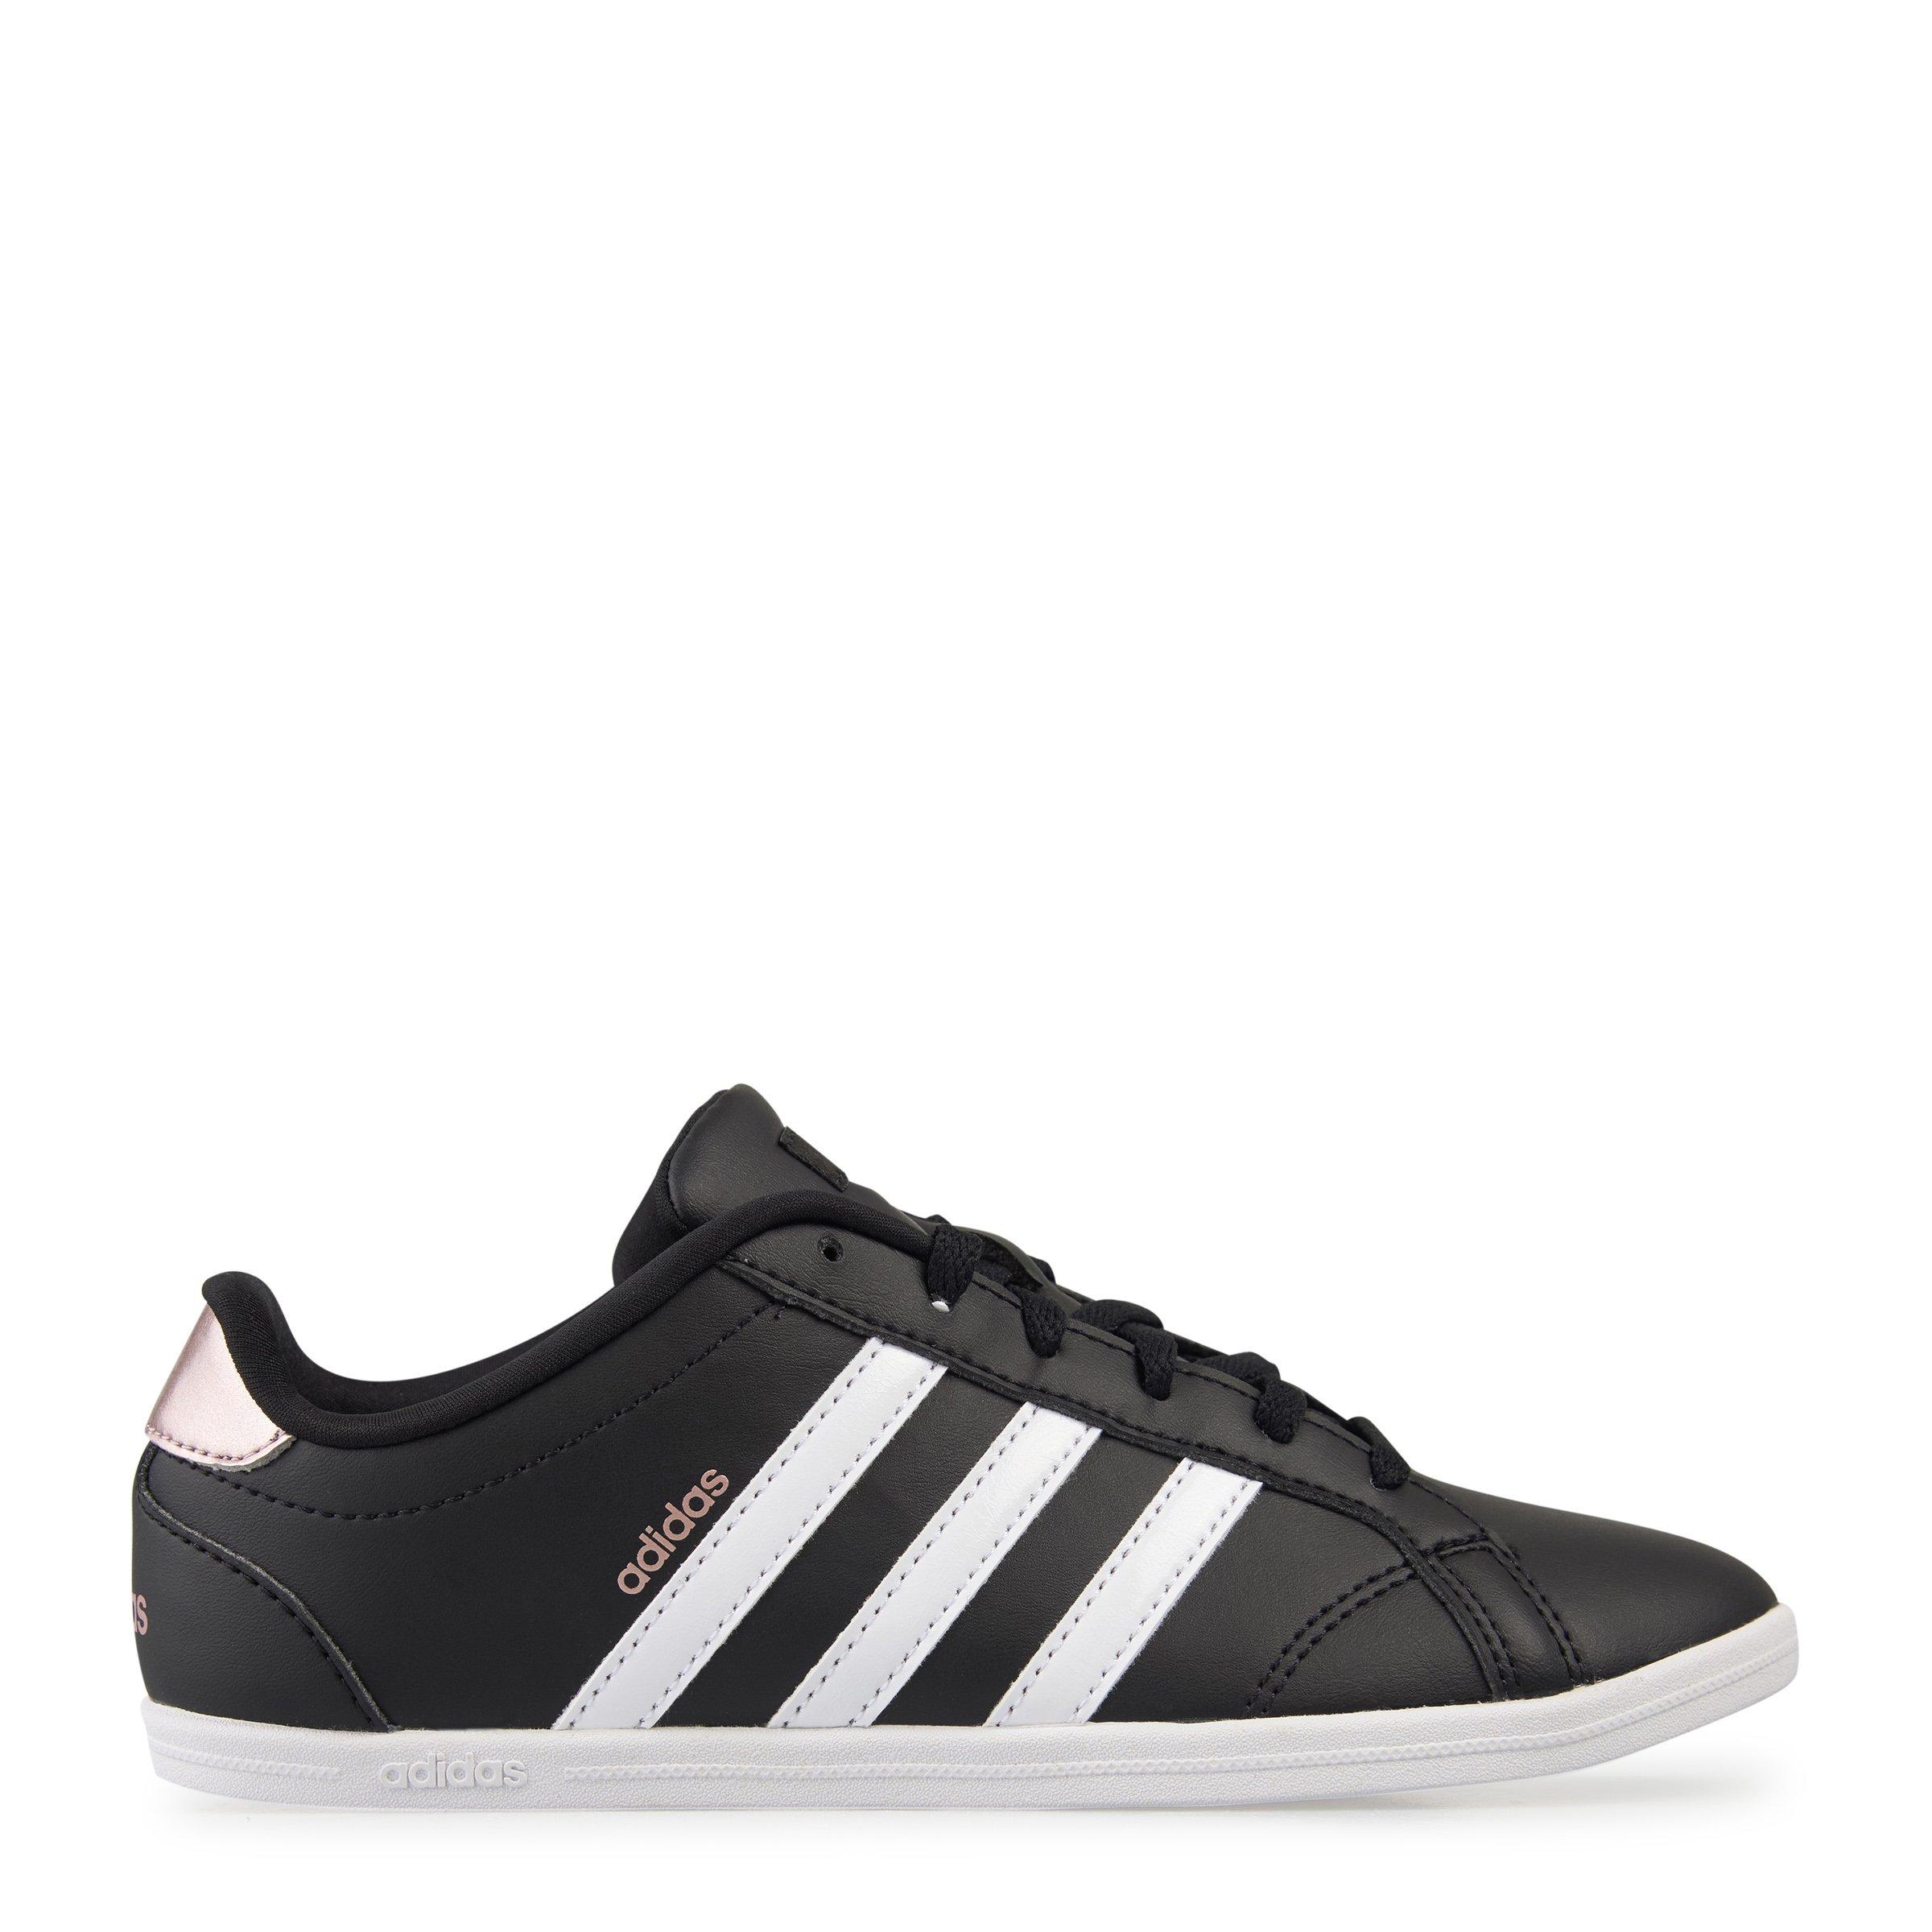 adidas sneakers at truworths